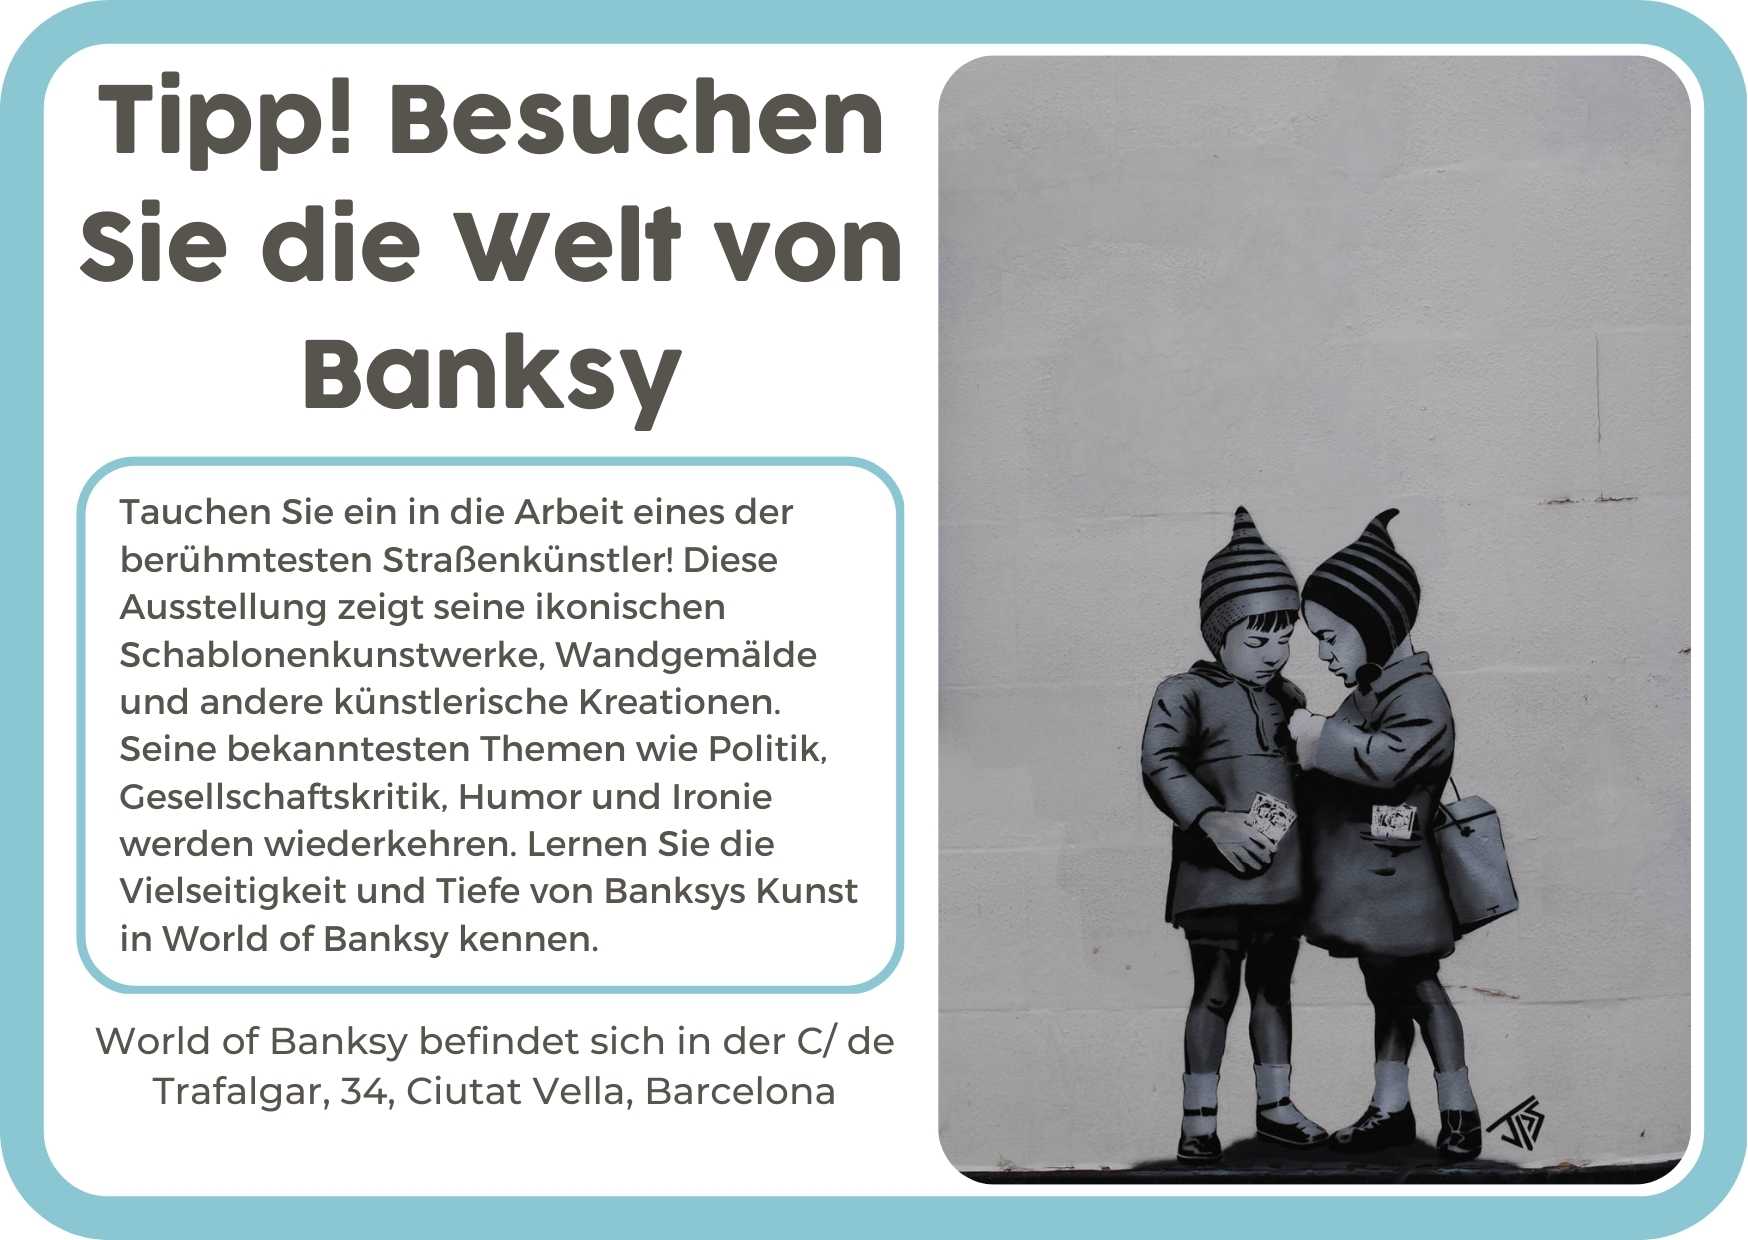 3. (Duits) World of Banksy